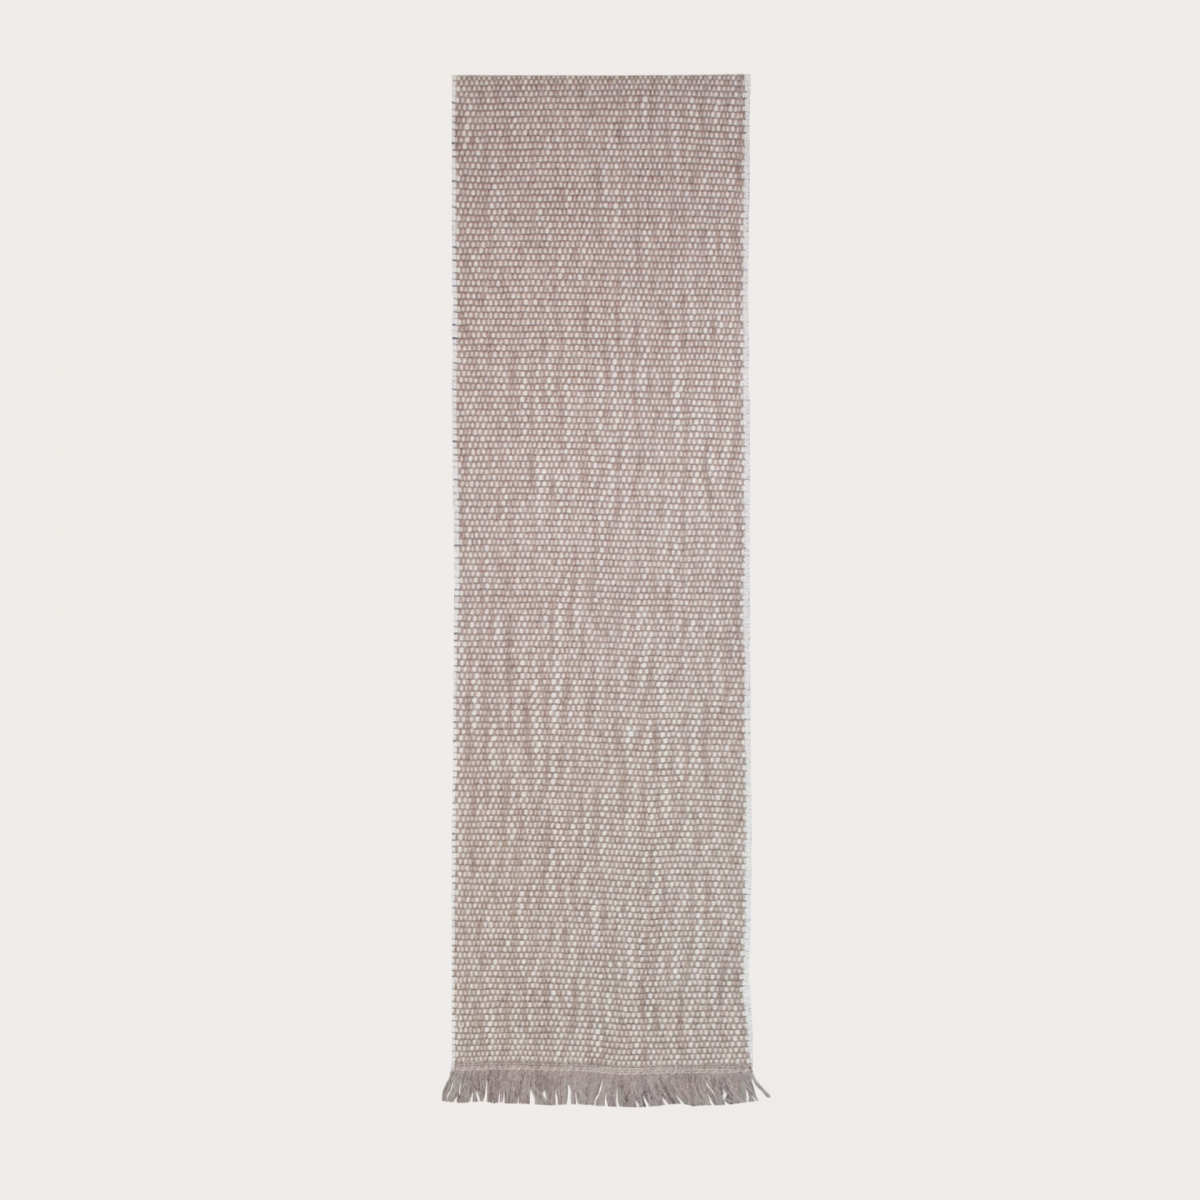 Cashmere scarf with woven pattern, beige and white